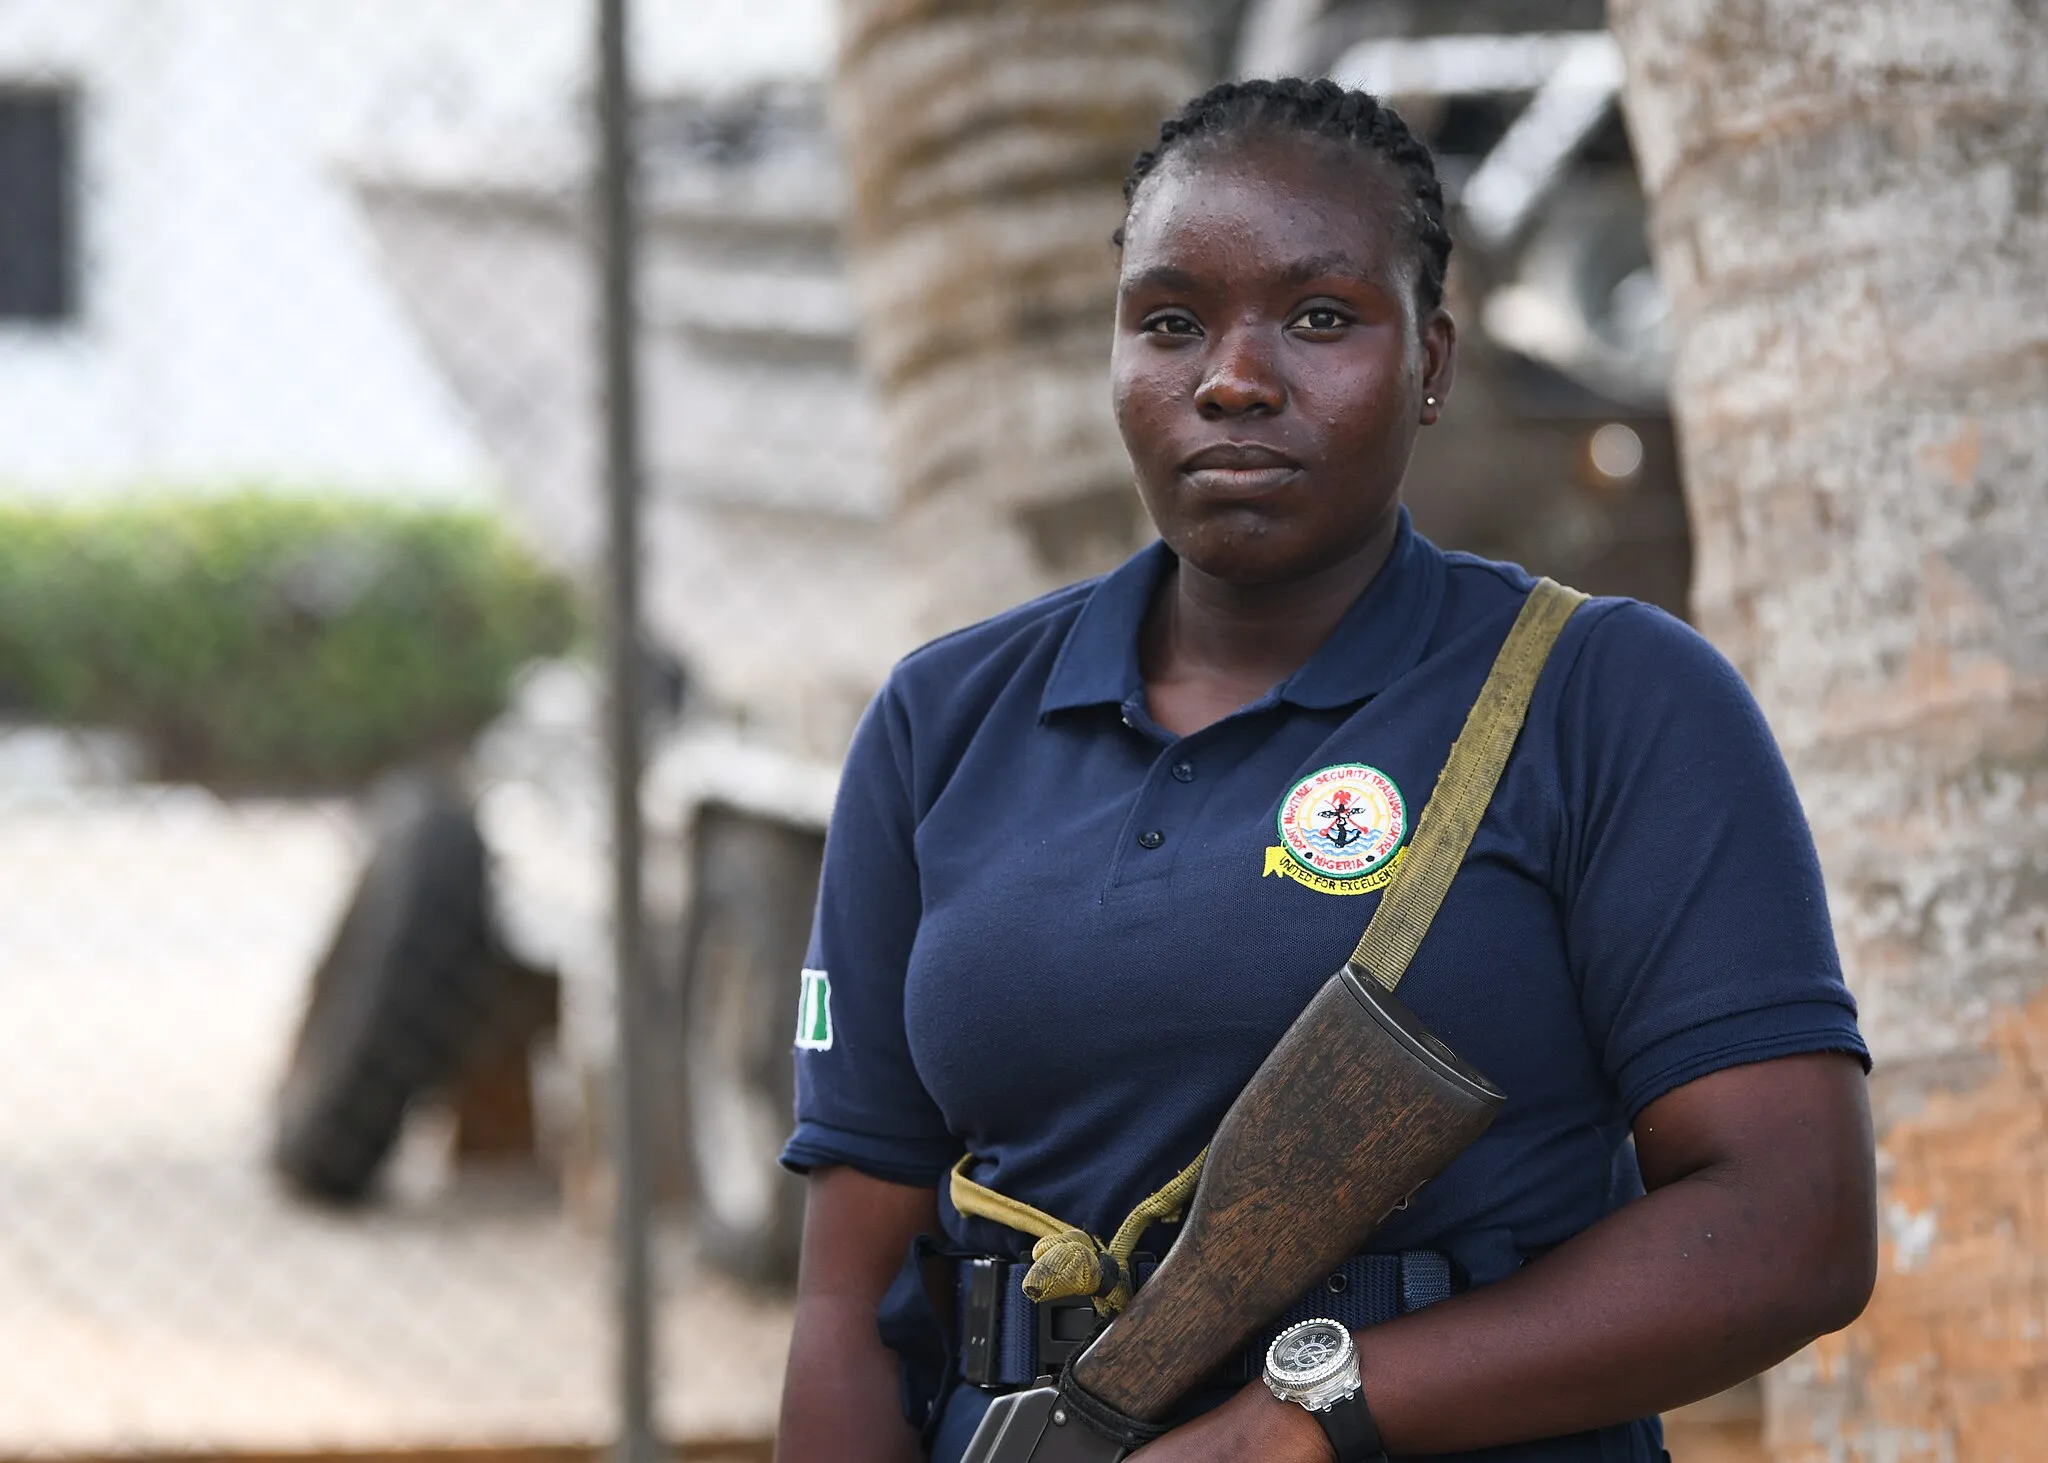 Photo showing: 230125-N-DK722-1022 (Jan. 25, 2023) LAGOS, Nigeria – Nigerian Navy Ordinary Seaman Hana Pearce Oluwatosin, a sentry, poses for a photo in Lagos, Nigeria, Jan. 25, 2023 during exercise Obangame Express 2023. Obangame Express 2023, conducted by U.S. Naval Forces Africa, is a maritime exercise designed to improve cooperation, and increase maritime safety and security among participating nations in the Gulf of Guinea and Southern Atlantic Ocean. U.S. Sixth Fleet, headquartered in Naples, Italy, conducts the full spectrum of joint and naval operations, often in concert with allied and interagency partners, in order to advance U.S. national interests and security and stability in Europe and Africa. (U.S. Navy photo by Mass Communication Specialist 1st class Cameron C. Edy)